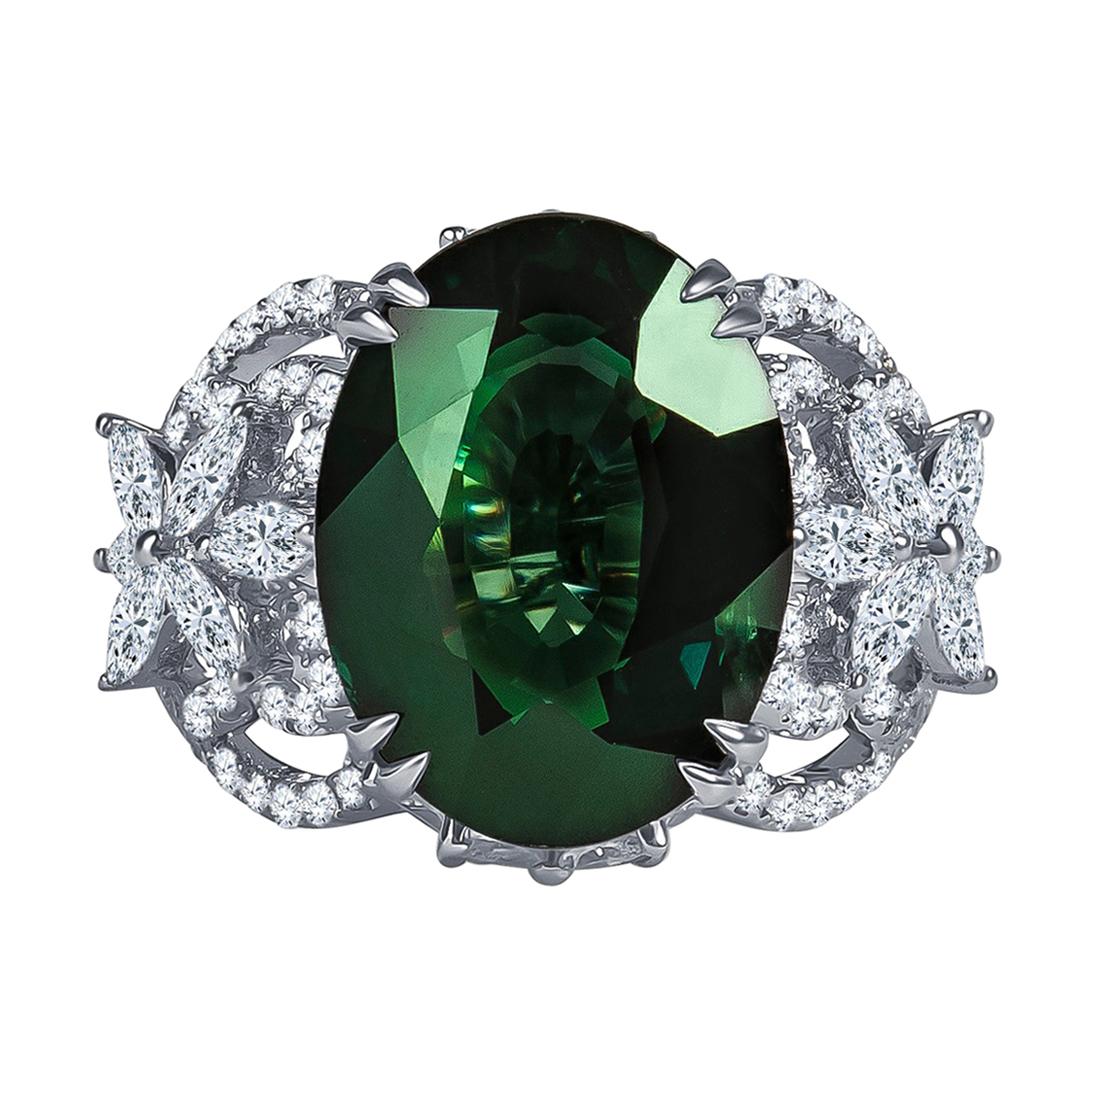 14.14 Carat Natural Green Sapphire Ring ‘GRS’ with 1.23 Carat Marquise Diamonds